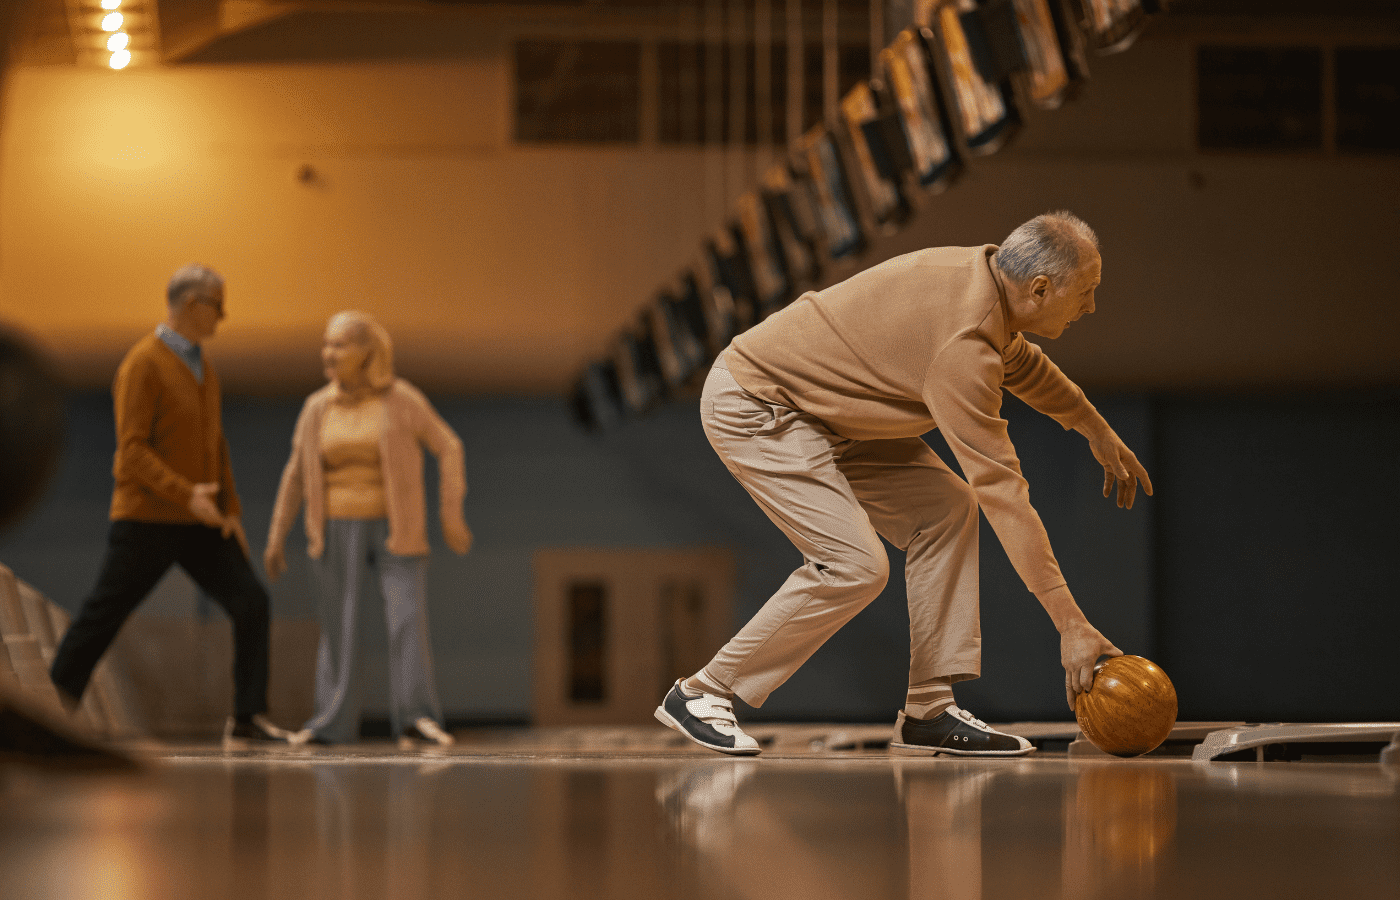 Can You Bowl With a Knee Replacement